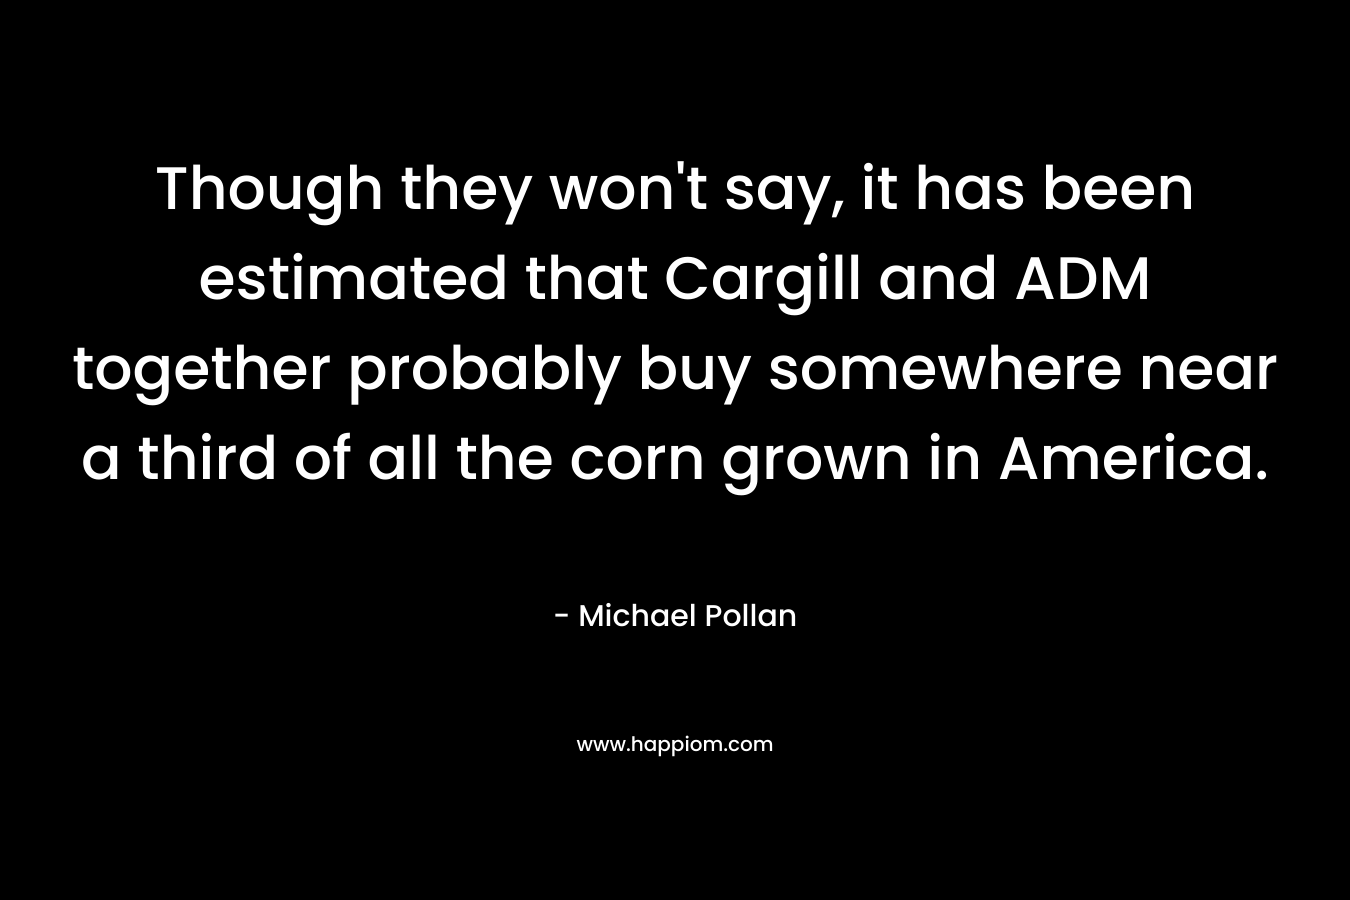 Though they won’t say, it has been estimated that Cargill and ADM together probably buy somewhere near a third of all the corn grown in America. – Michael Pollan